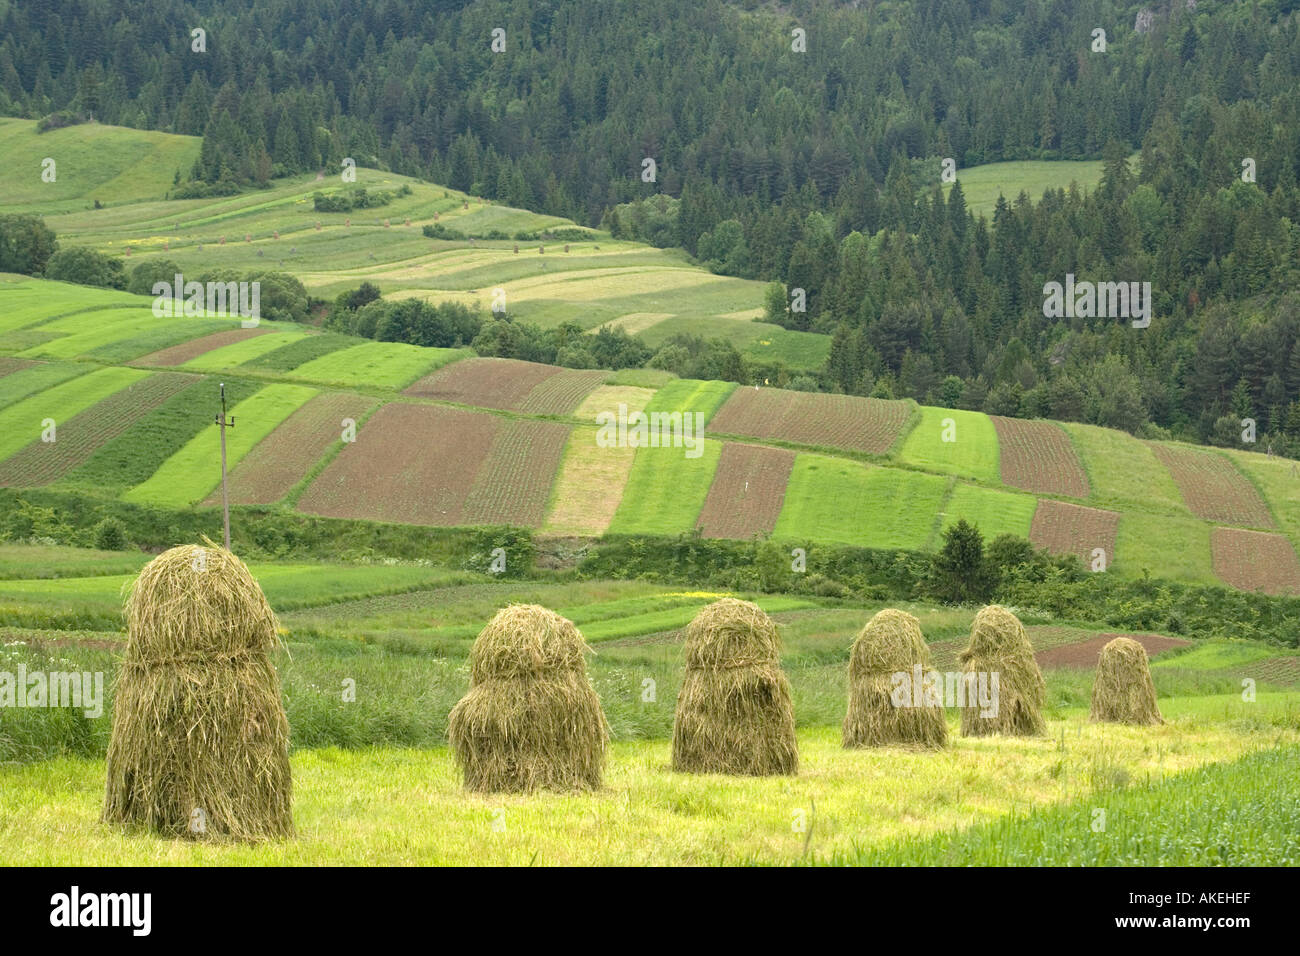 Open field systems in Tatra foothills, southern Poland near Nowy Sacz. Stock Photo